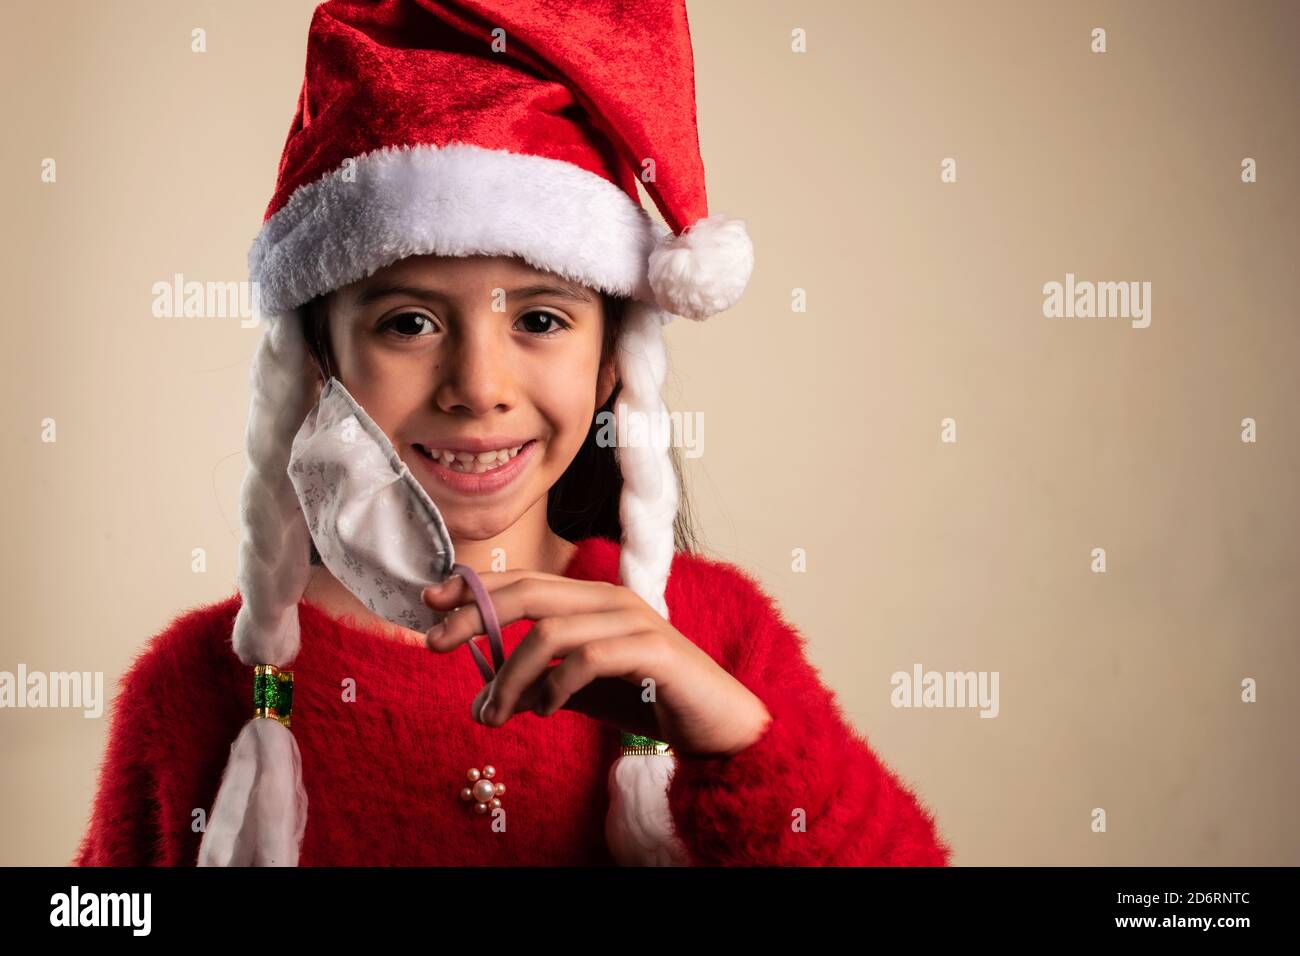 Girl wearing a red Santa Claus hat holding down her mask and smiling Stock Photo